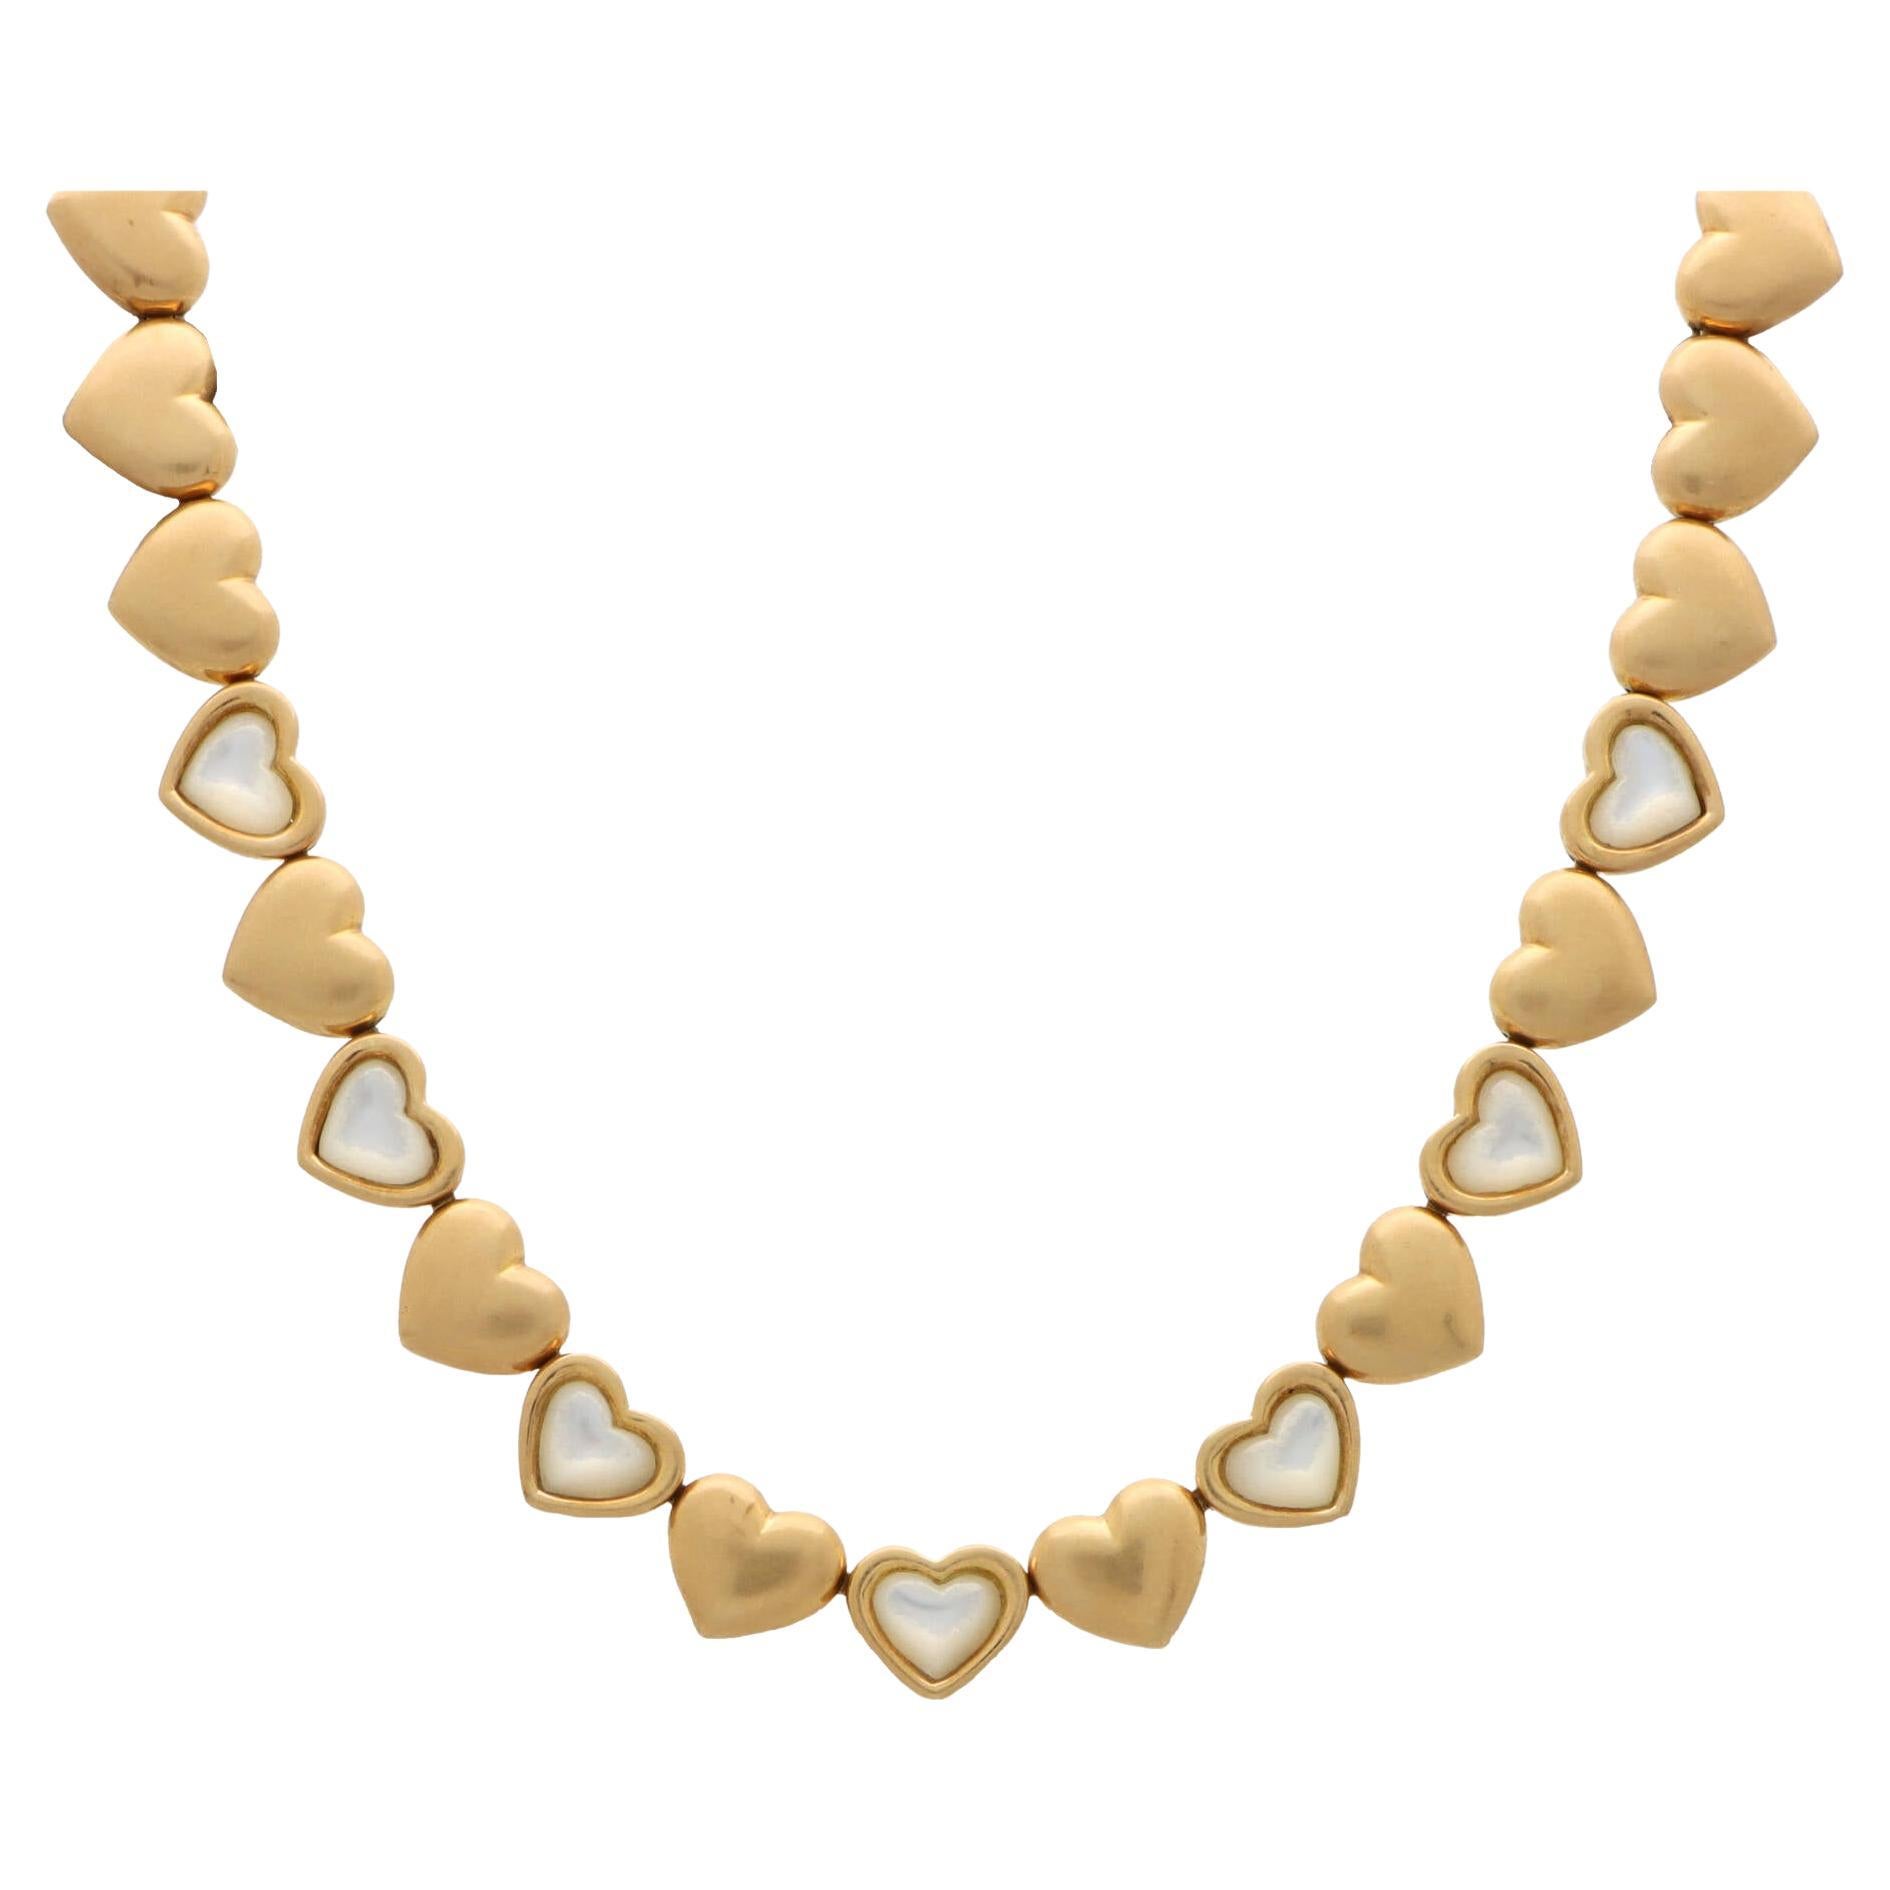 Vintage Mauboussin Mother of Pearl Heart Necklace Set in 18k Yellow Gold